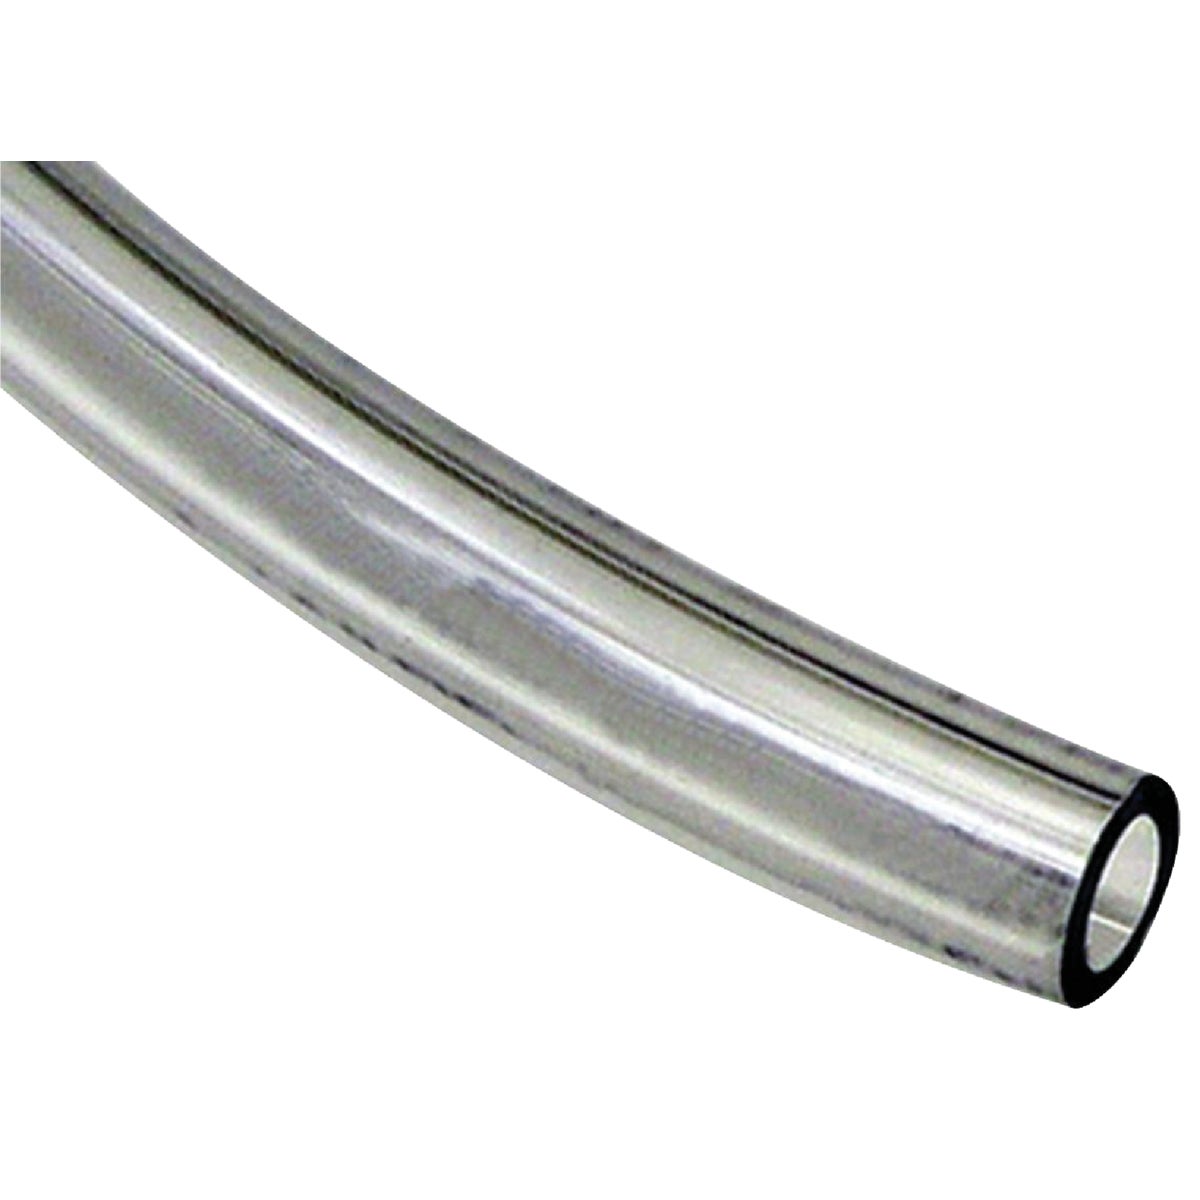 Item 453641, Clear vinyl tubing. Suitable for use with liquids, chemicals, and gases.